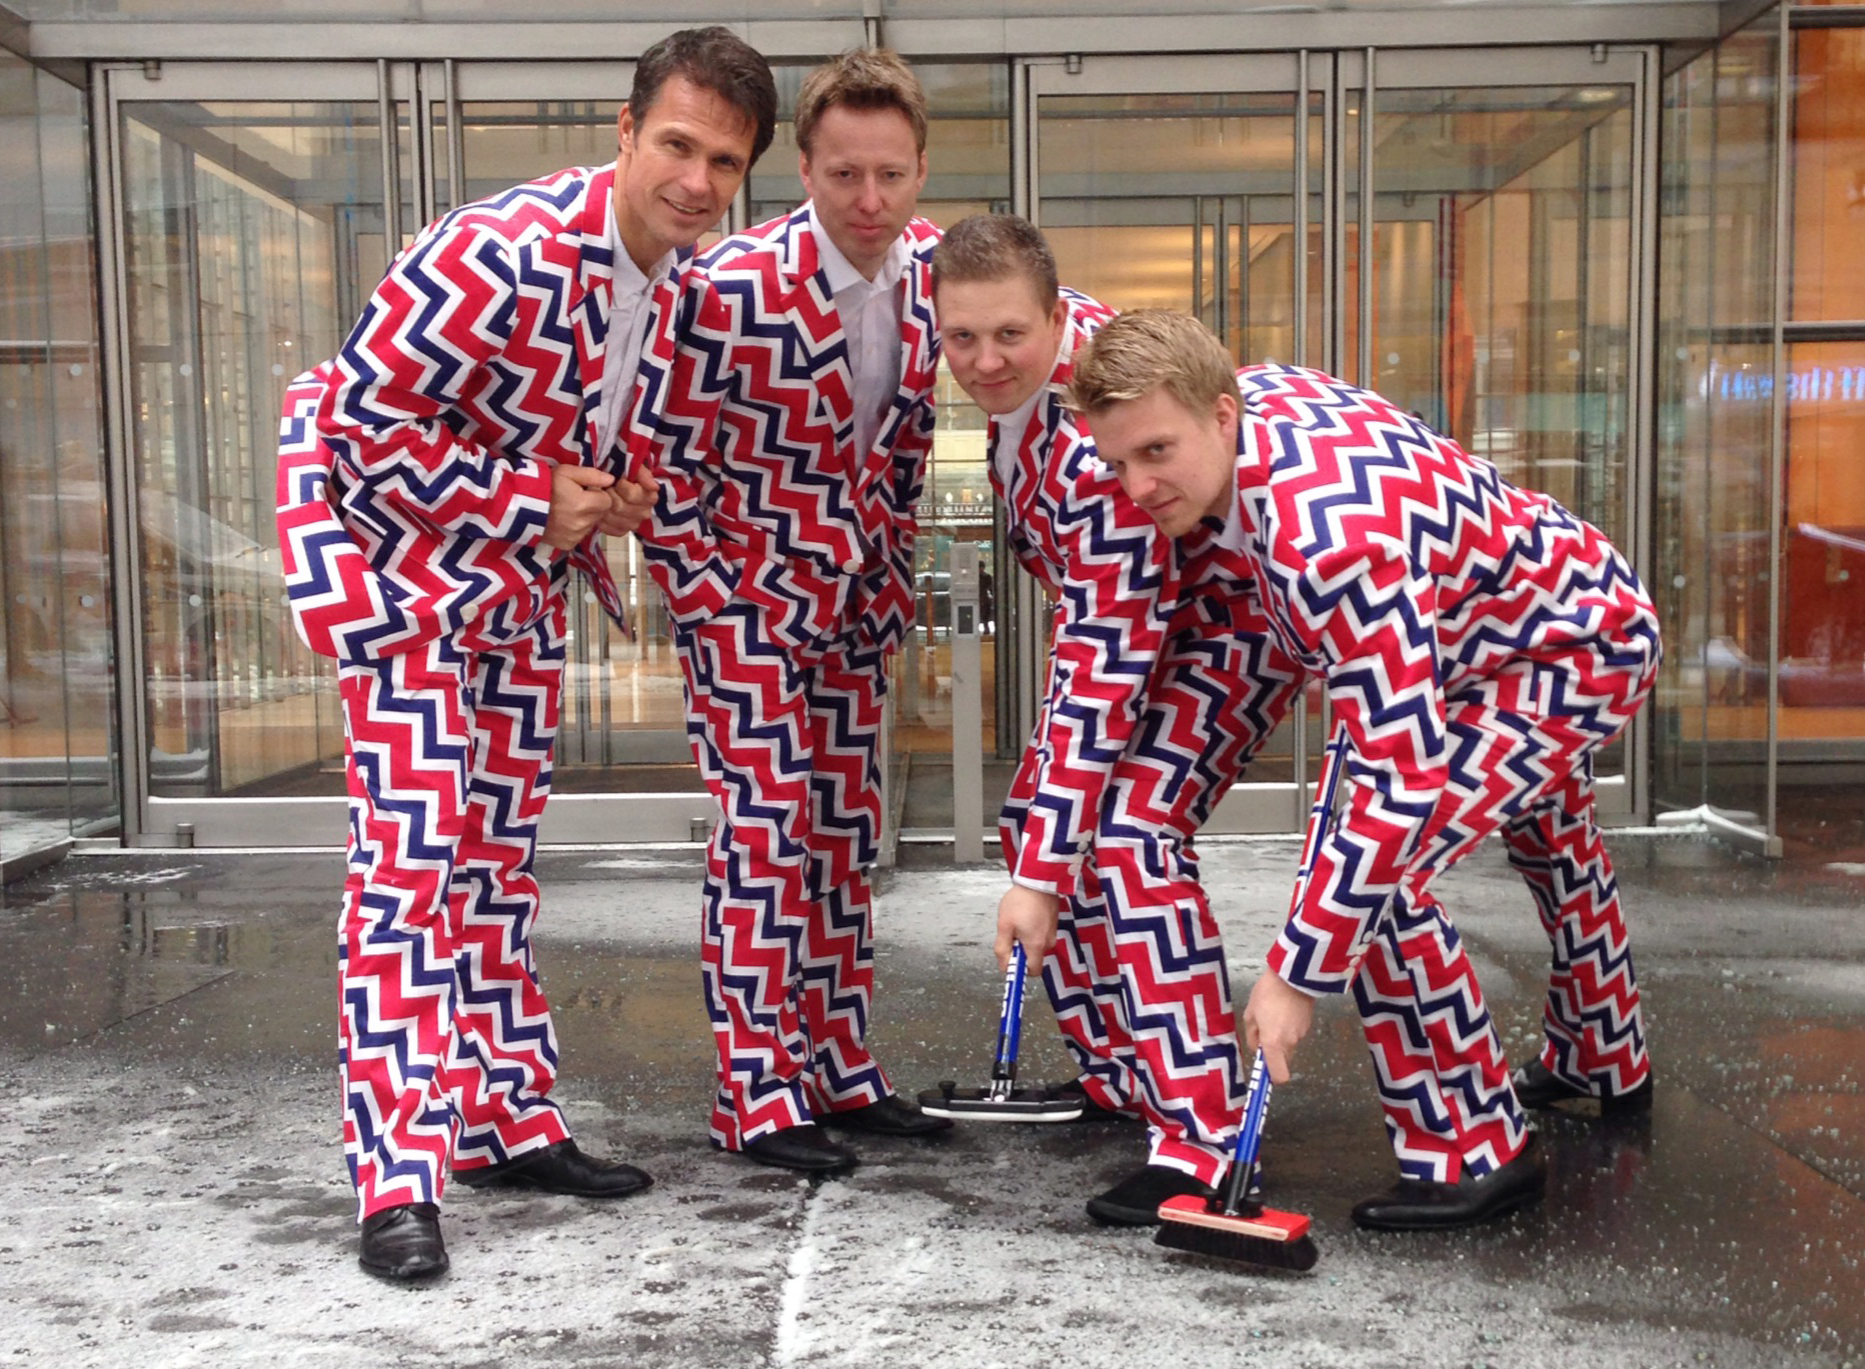 If Norway's curling team fails to win a gold medal, the Eurovision Song Contest beckons.